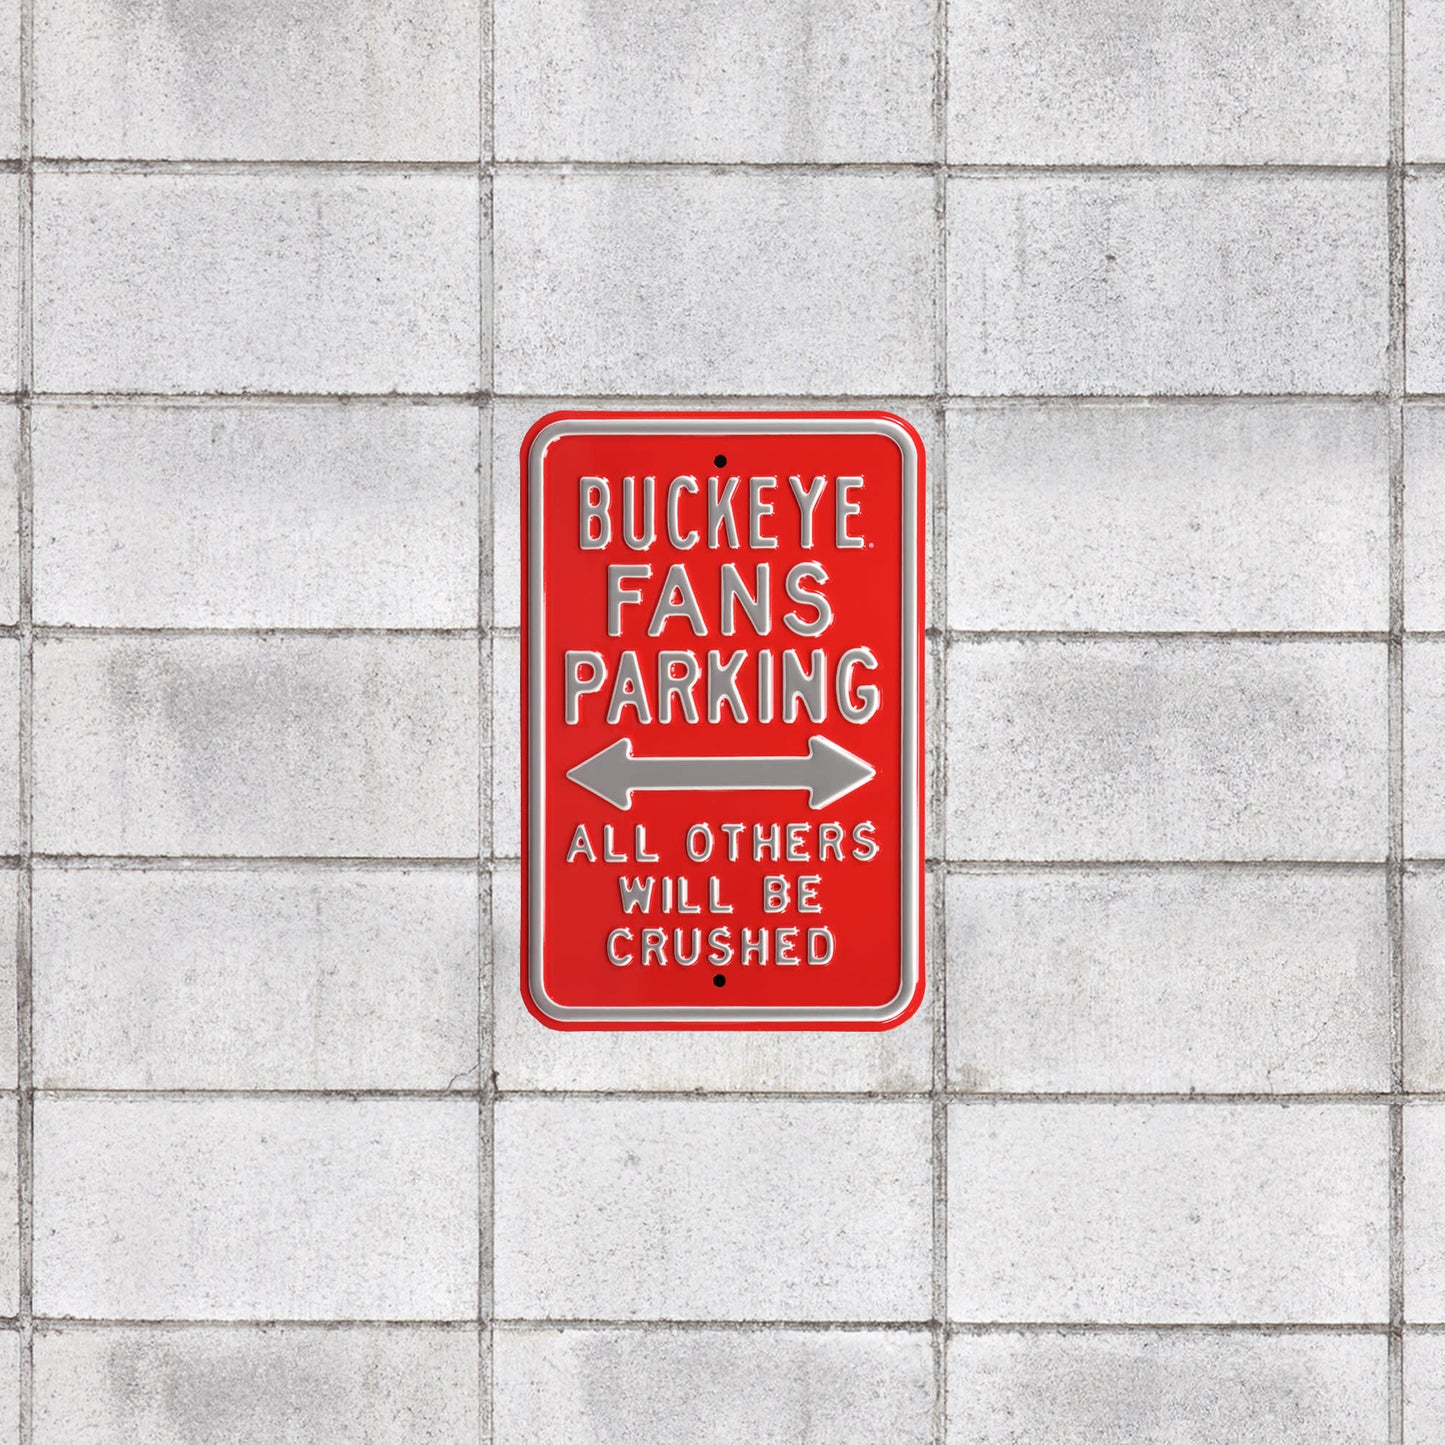 Ohio State Buckeyes: Crushed Parking - Officially Licensed Metal Street Sign